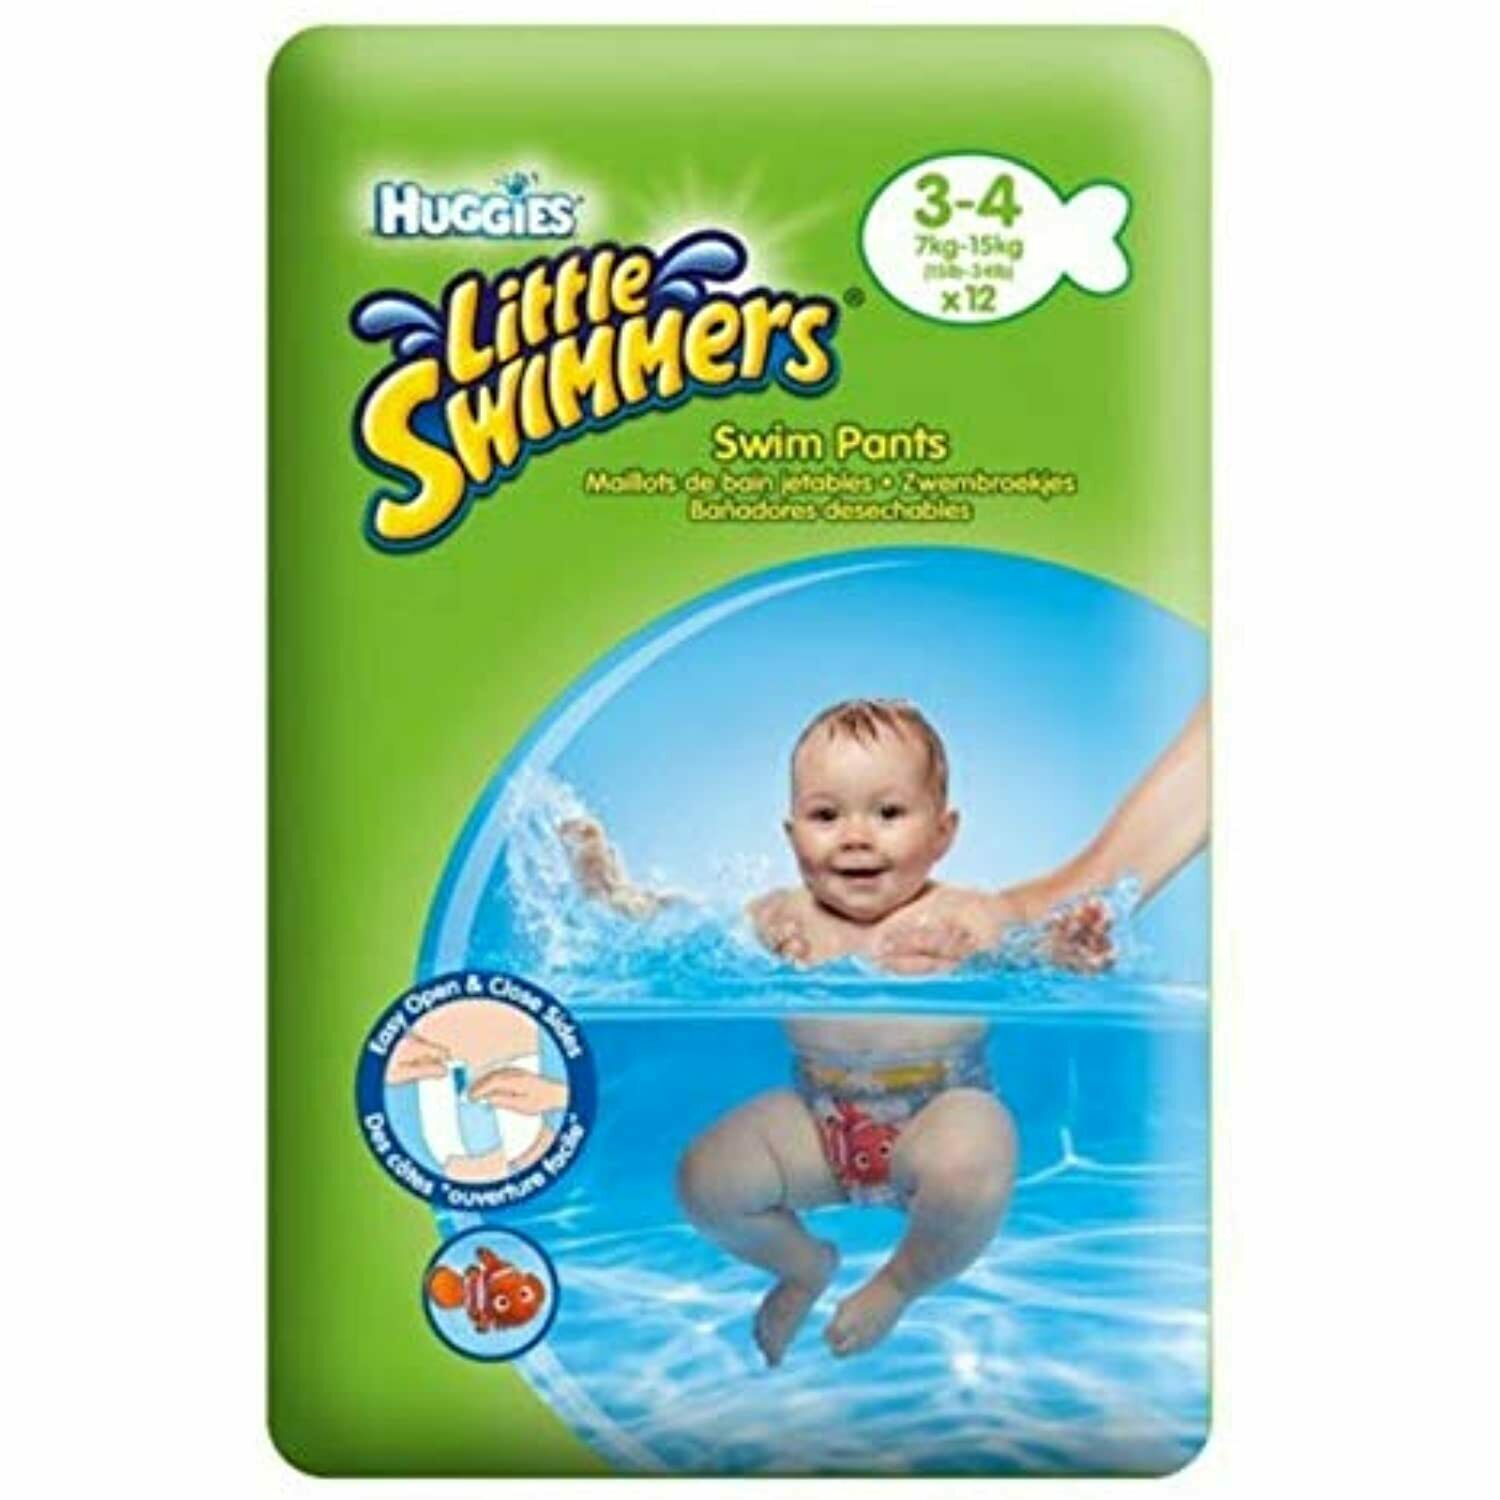 Huggies Little Swimmers Disposable Swim Diapers Small 12 Count Pink Blue 3-4